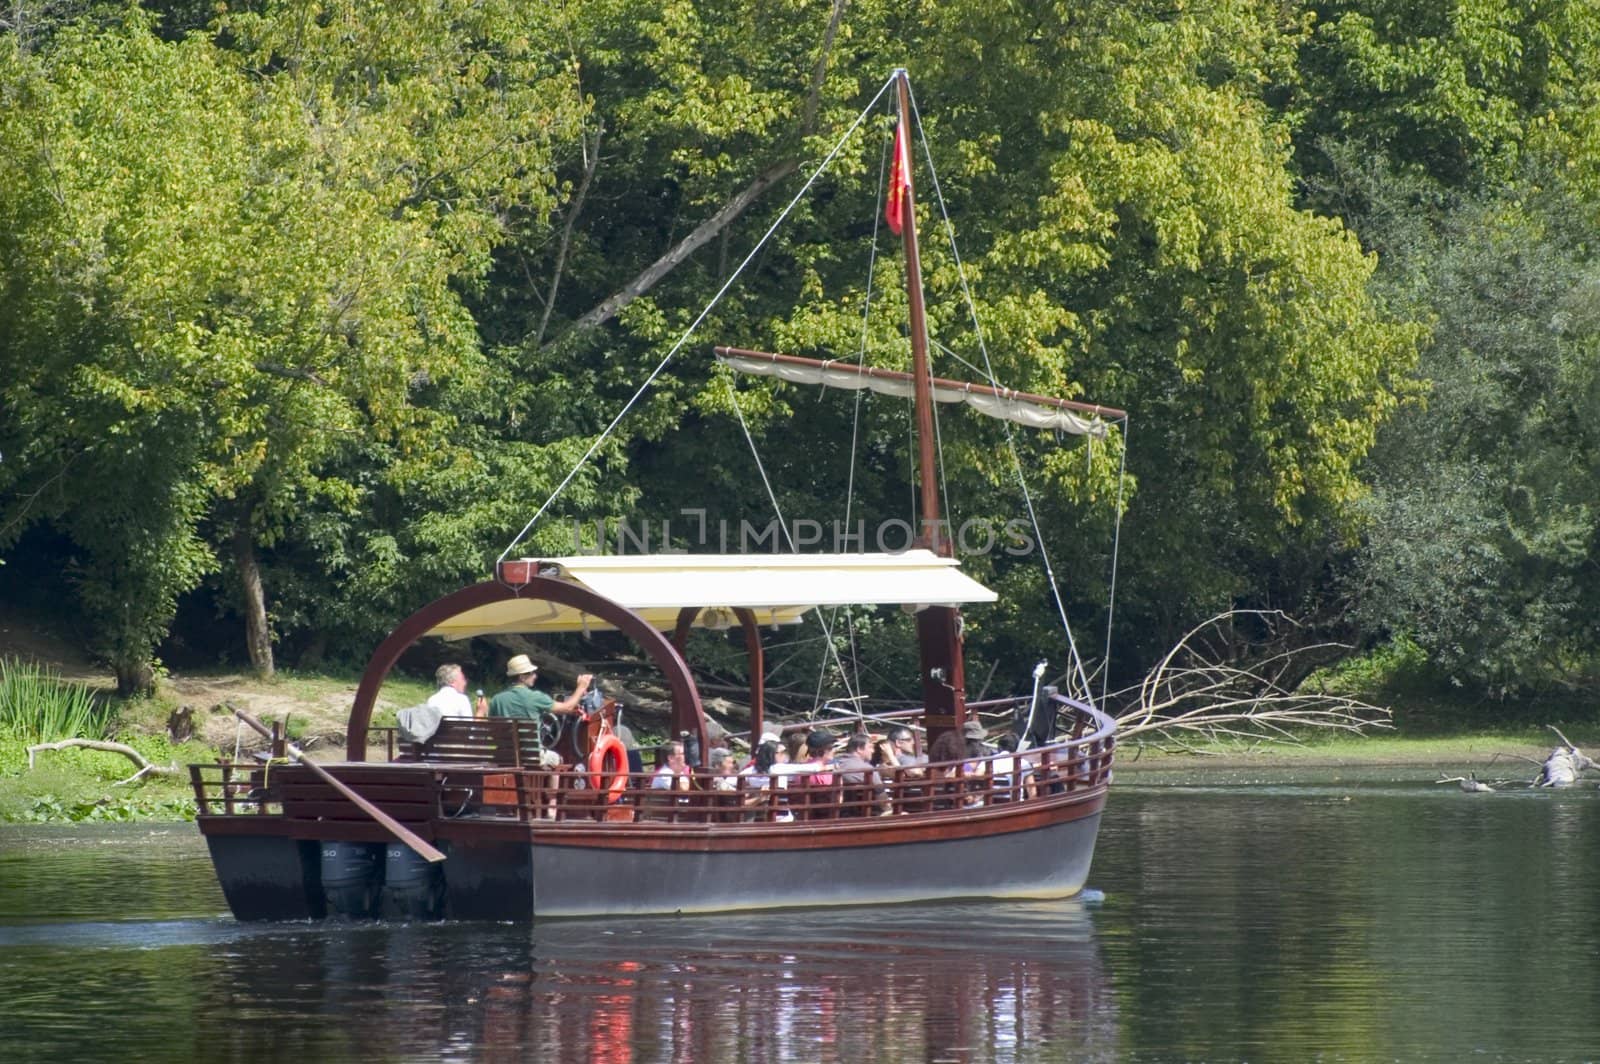 A walk in boat on the Dordogne on board traditional boats
called barges or gabarres